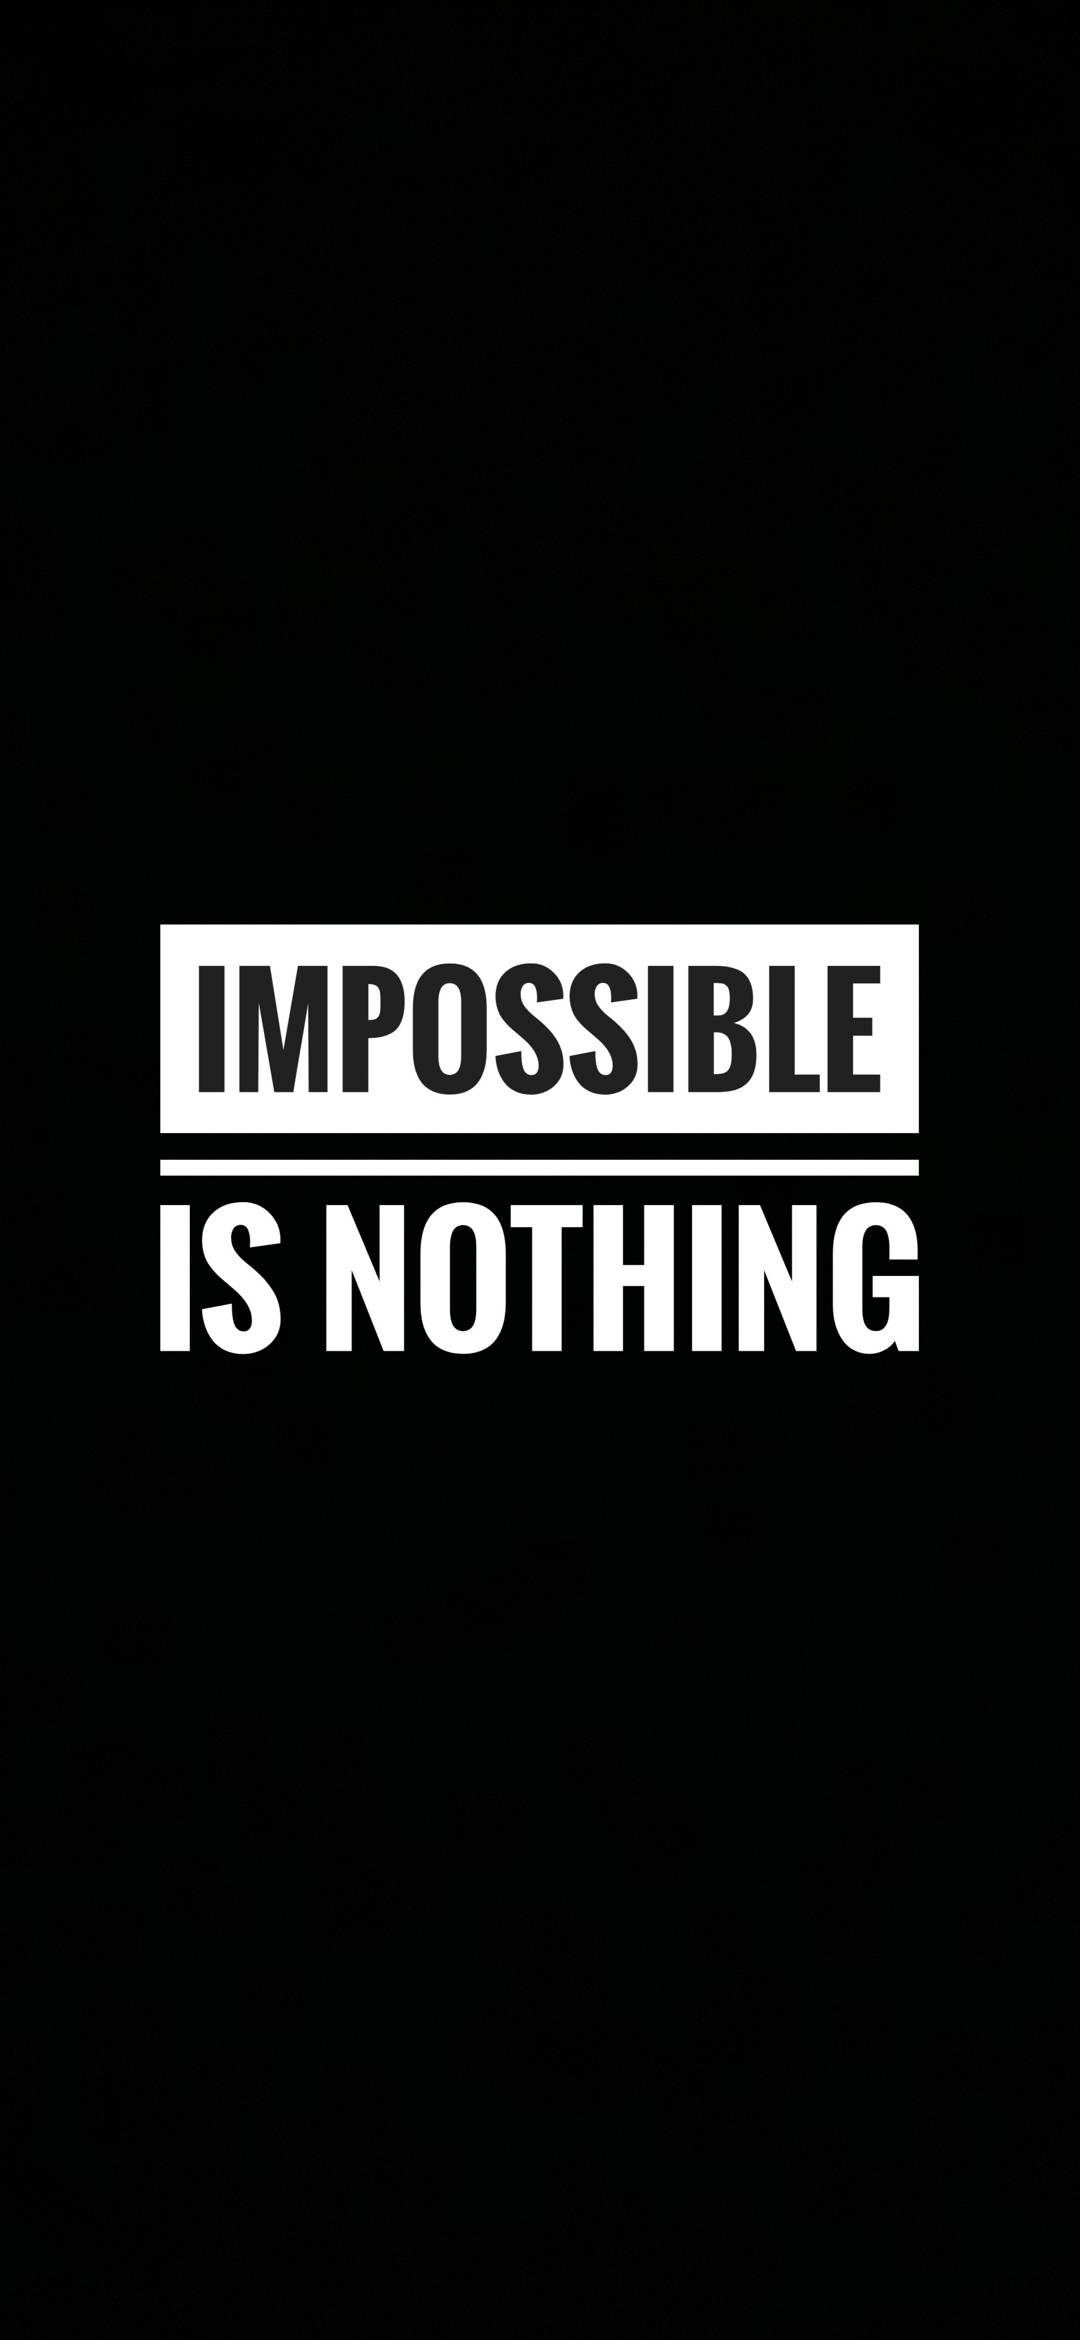 Nothing Impossible Motivational Wallpaper Poster